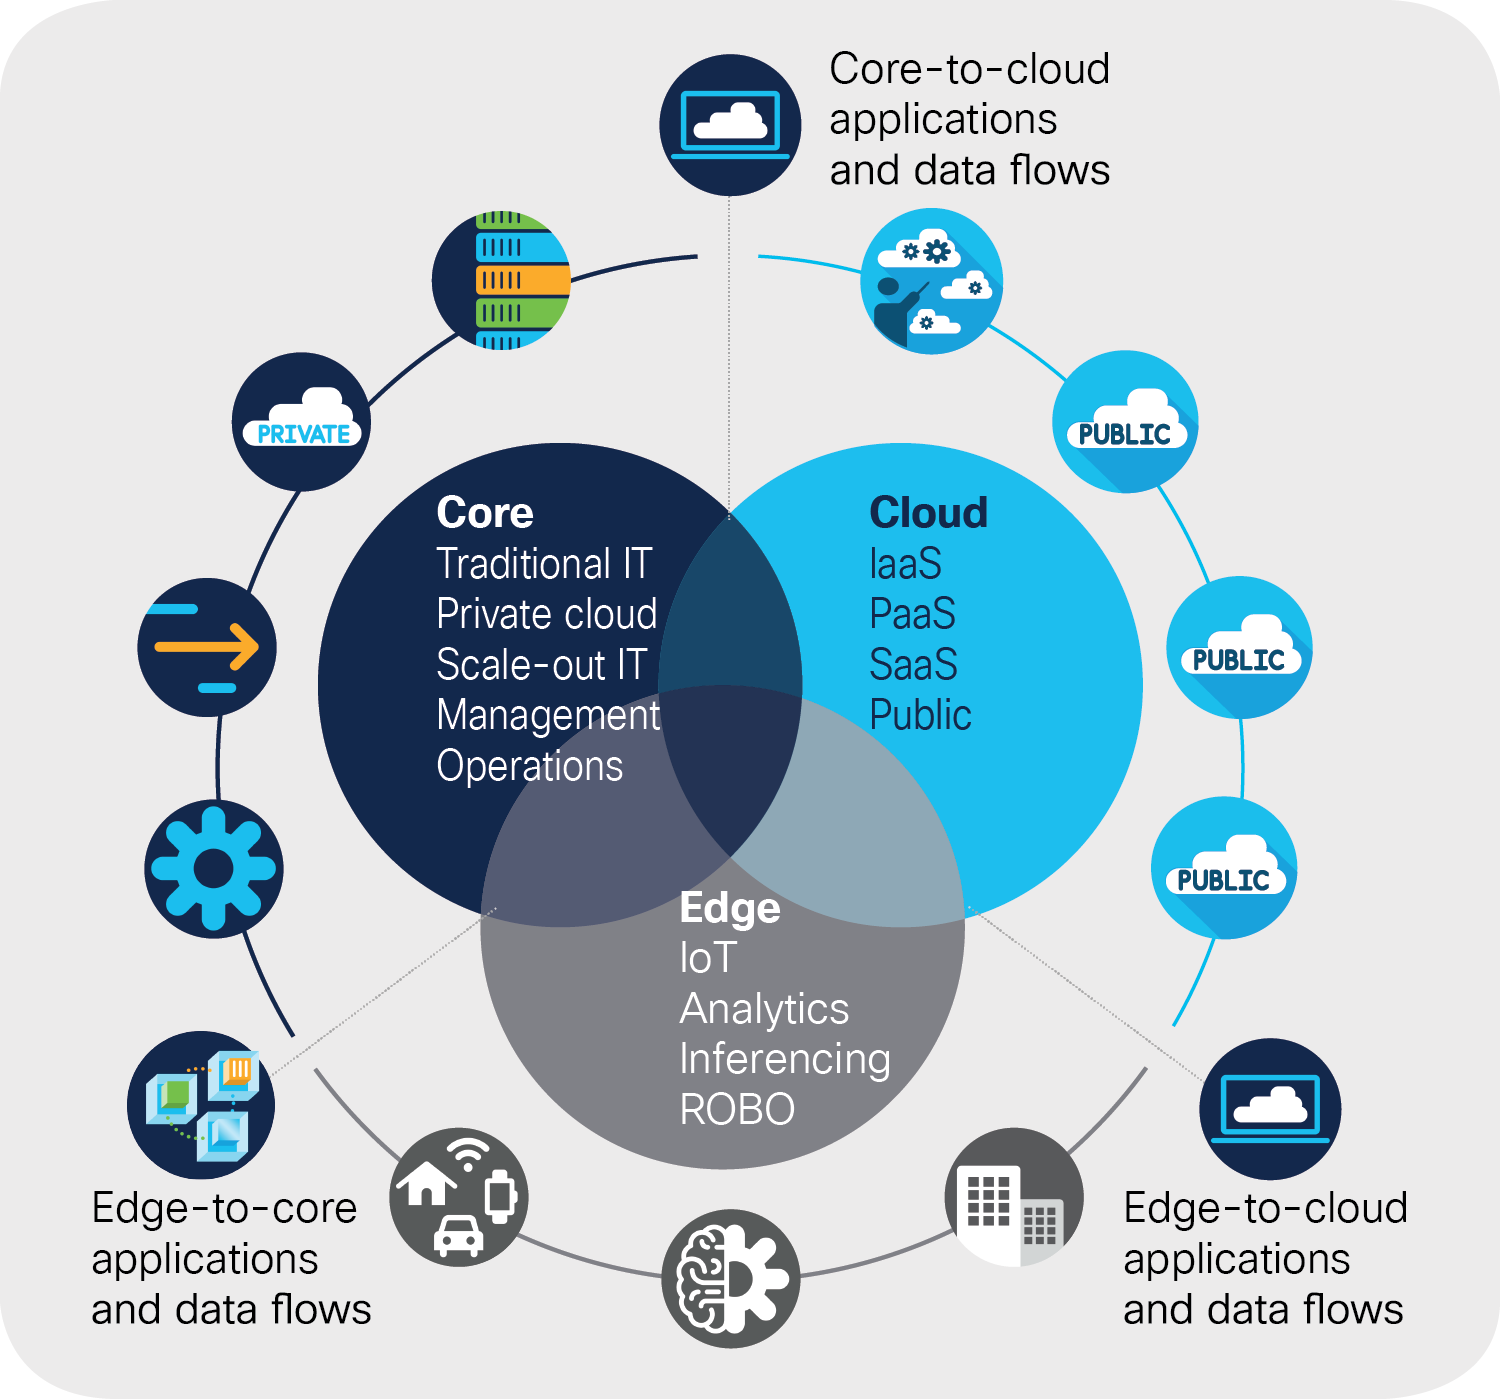 Cisco HyperFlex systems meet the challenges of the data center core, multicloud, and edge deployments